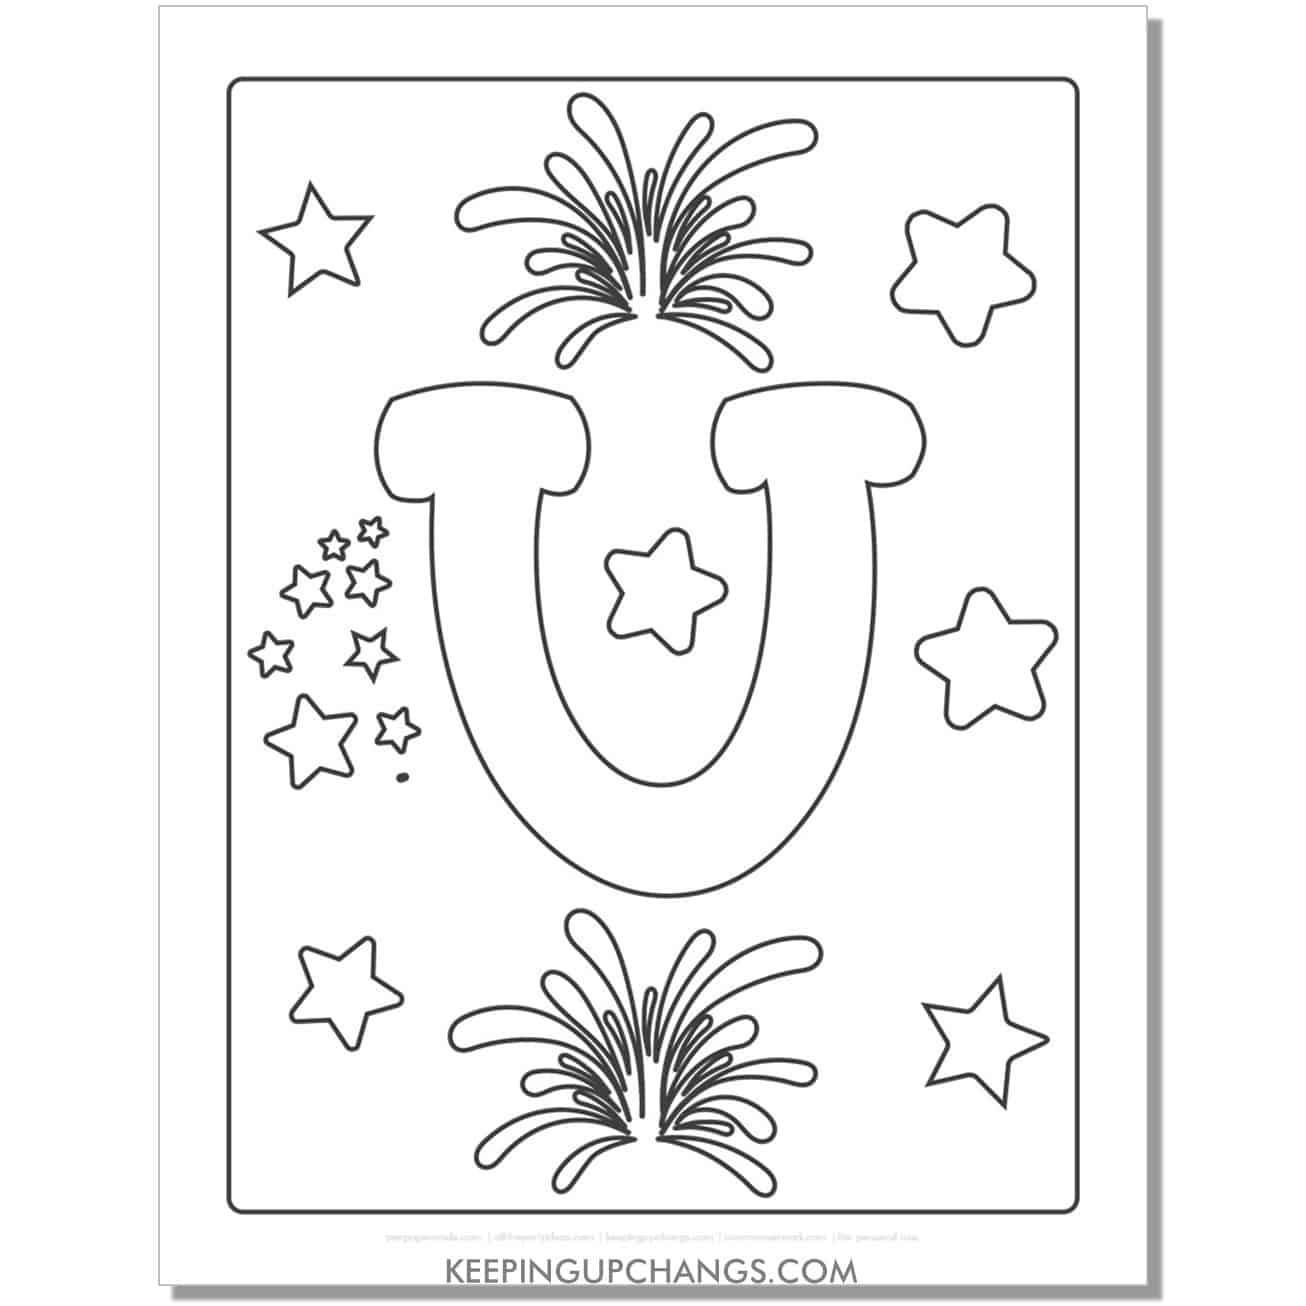 cool letter u to color with stars, space theme.